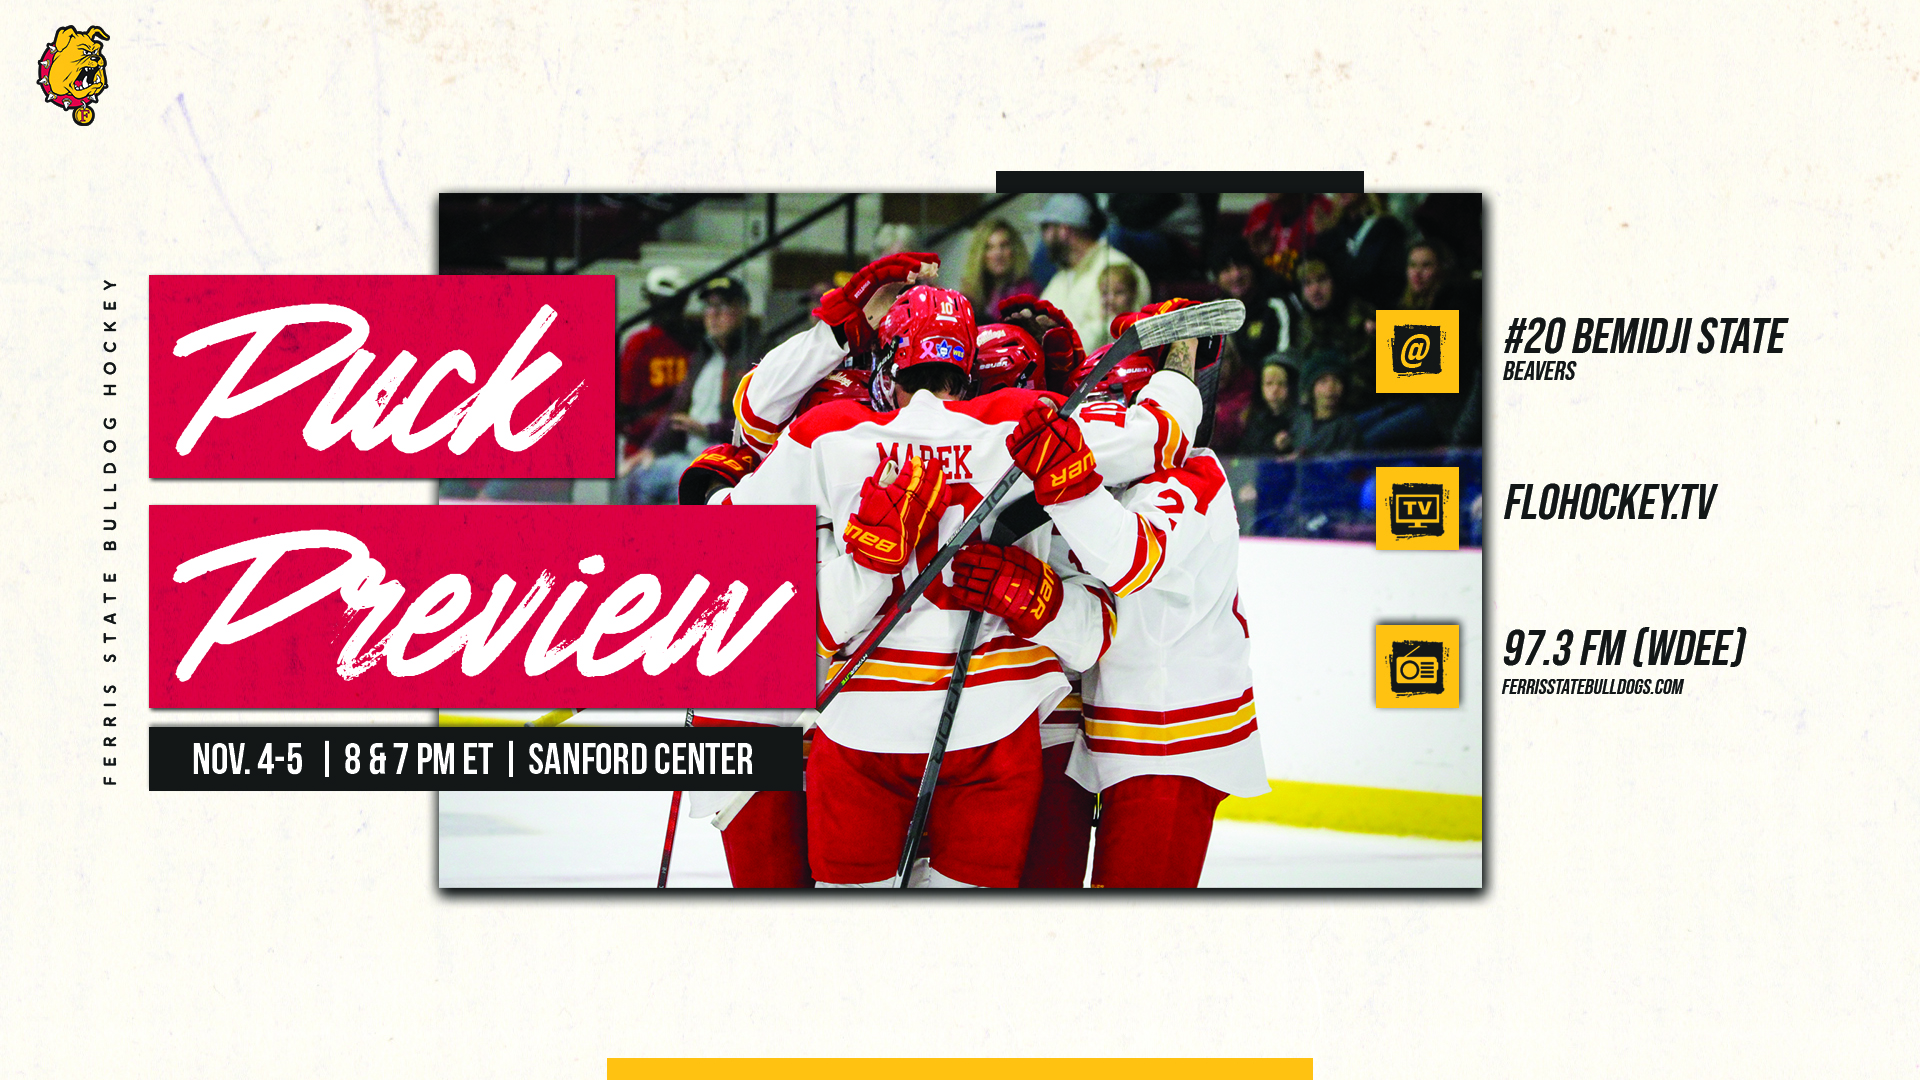 PUCK PREVIEW | Ferris State Hits Road For League Battle at #20 Bemidji State